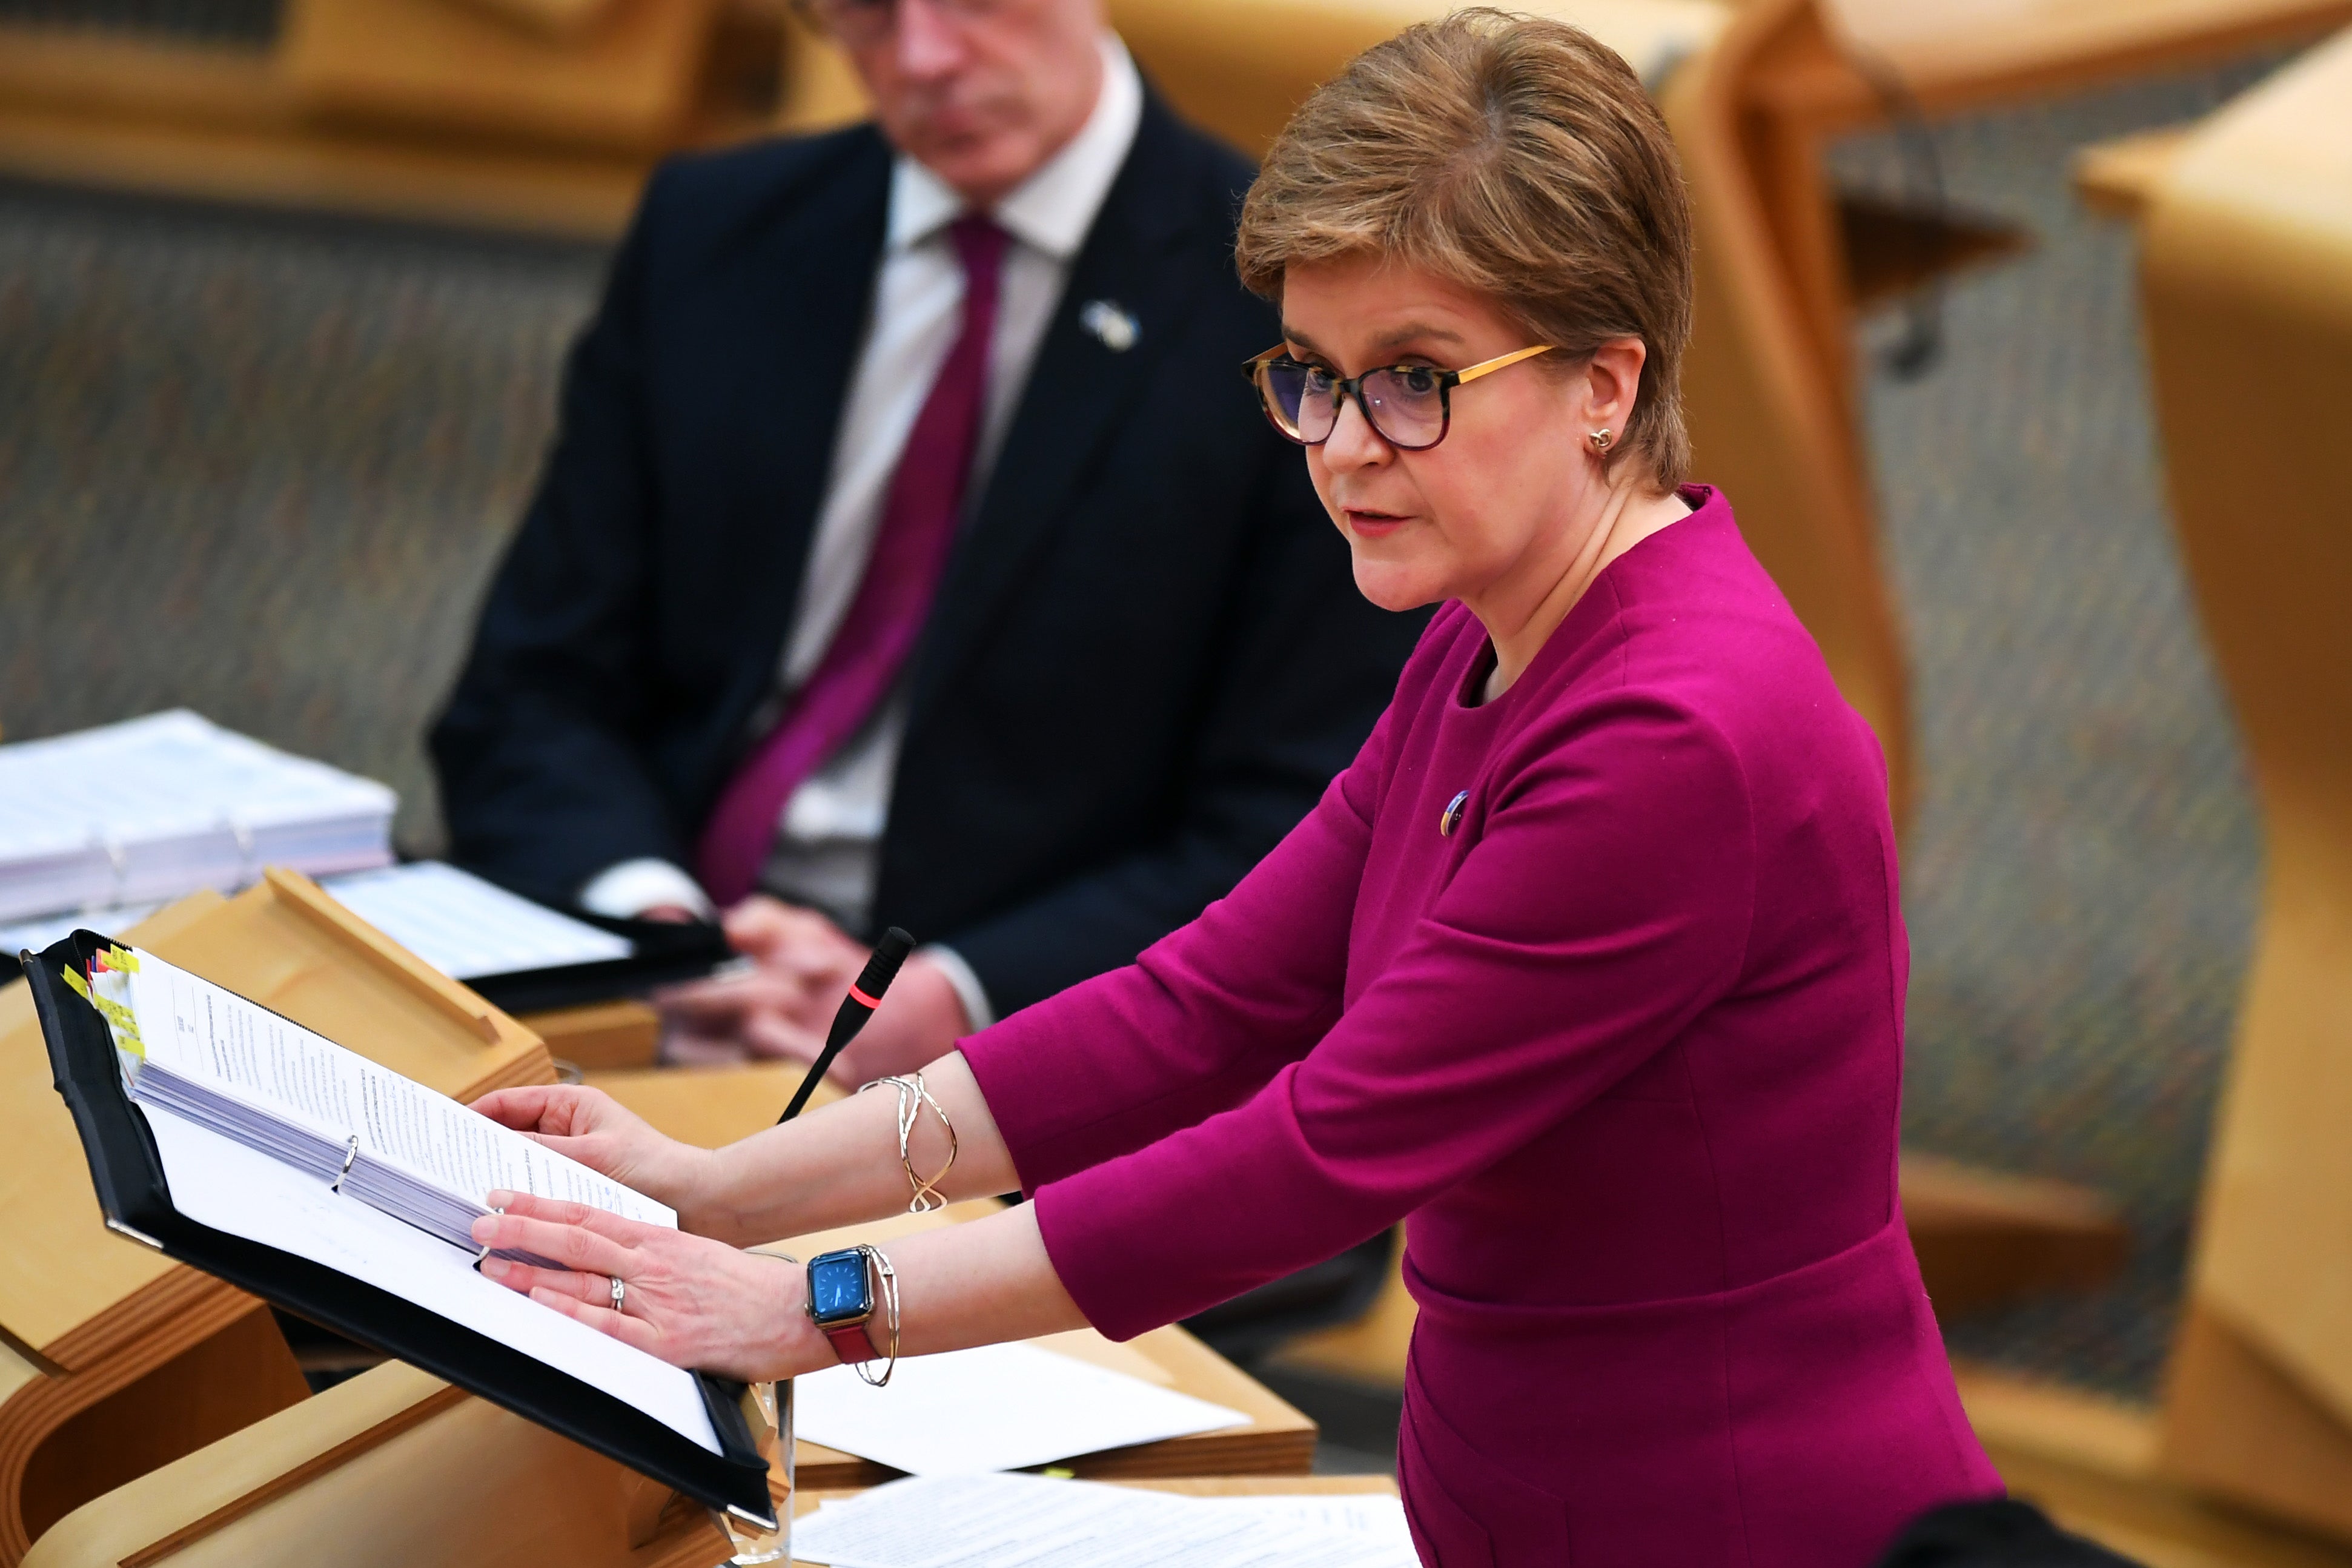 Nicola Sturgeon will announce if Covid restrictions are to be eased on Tuesday afternoon (Andy Buchanan/PA)